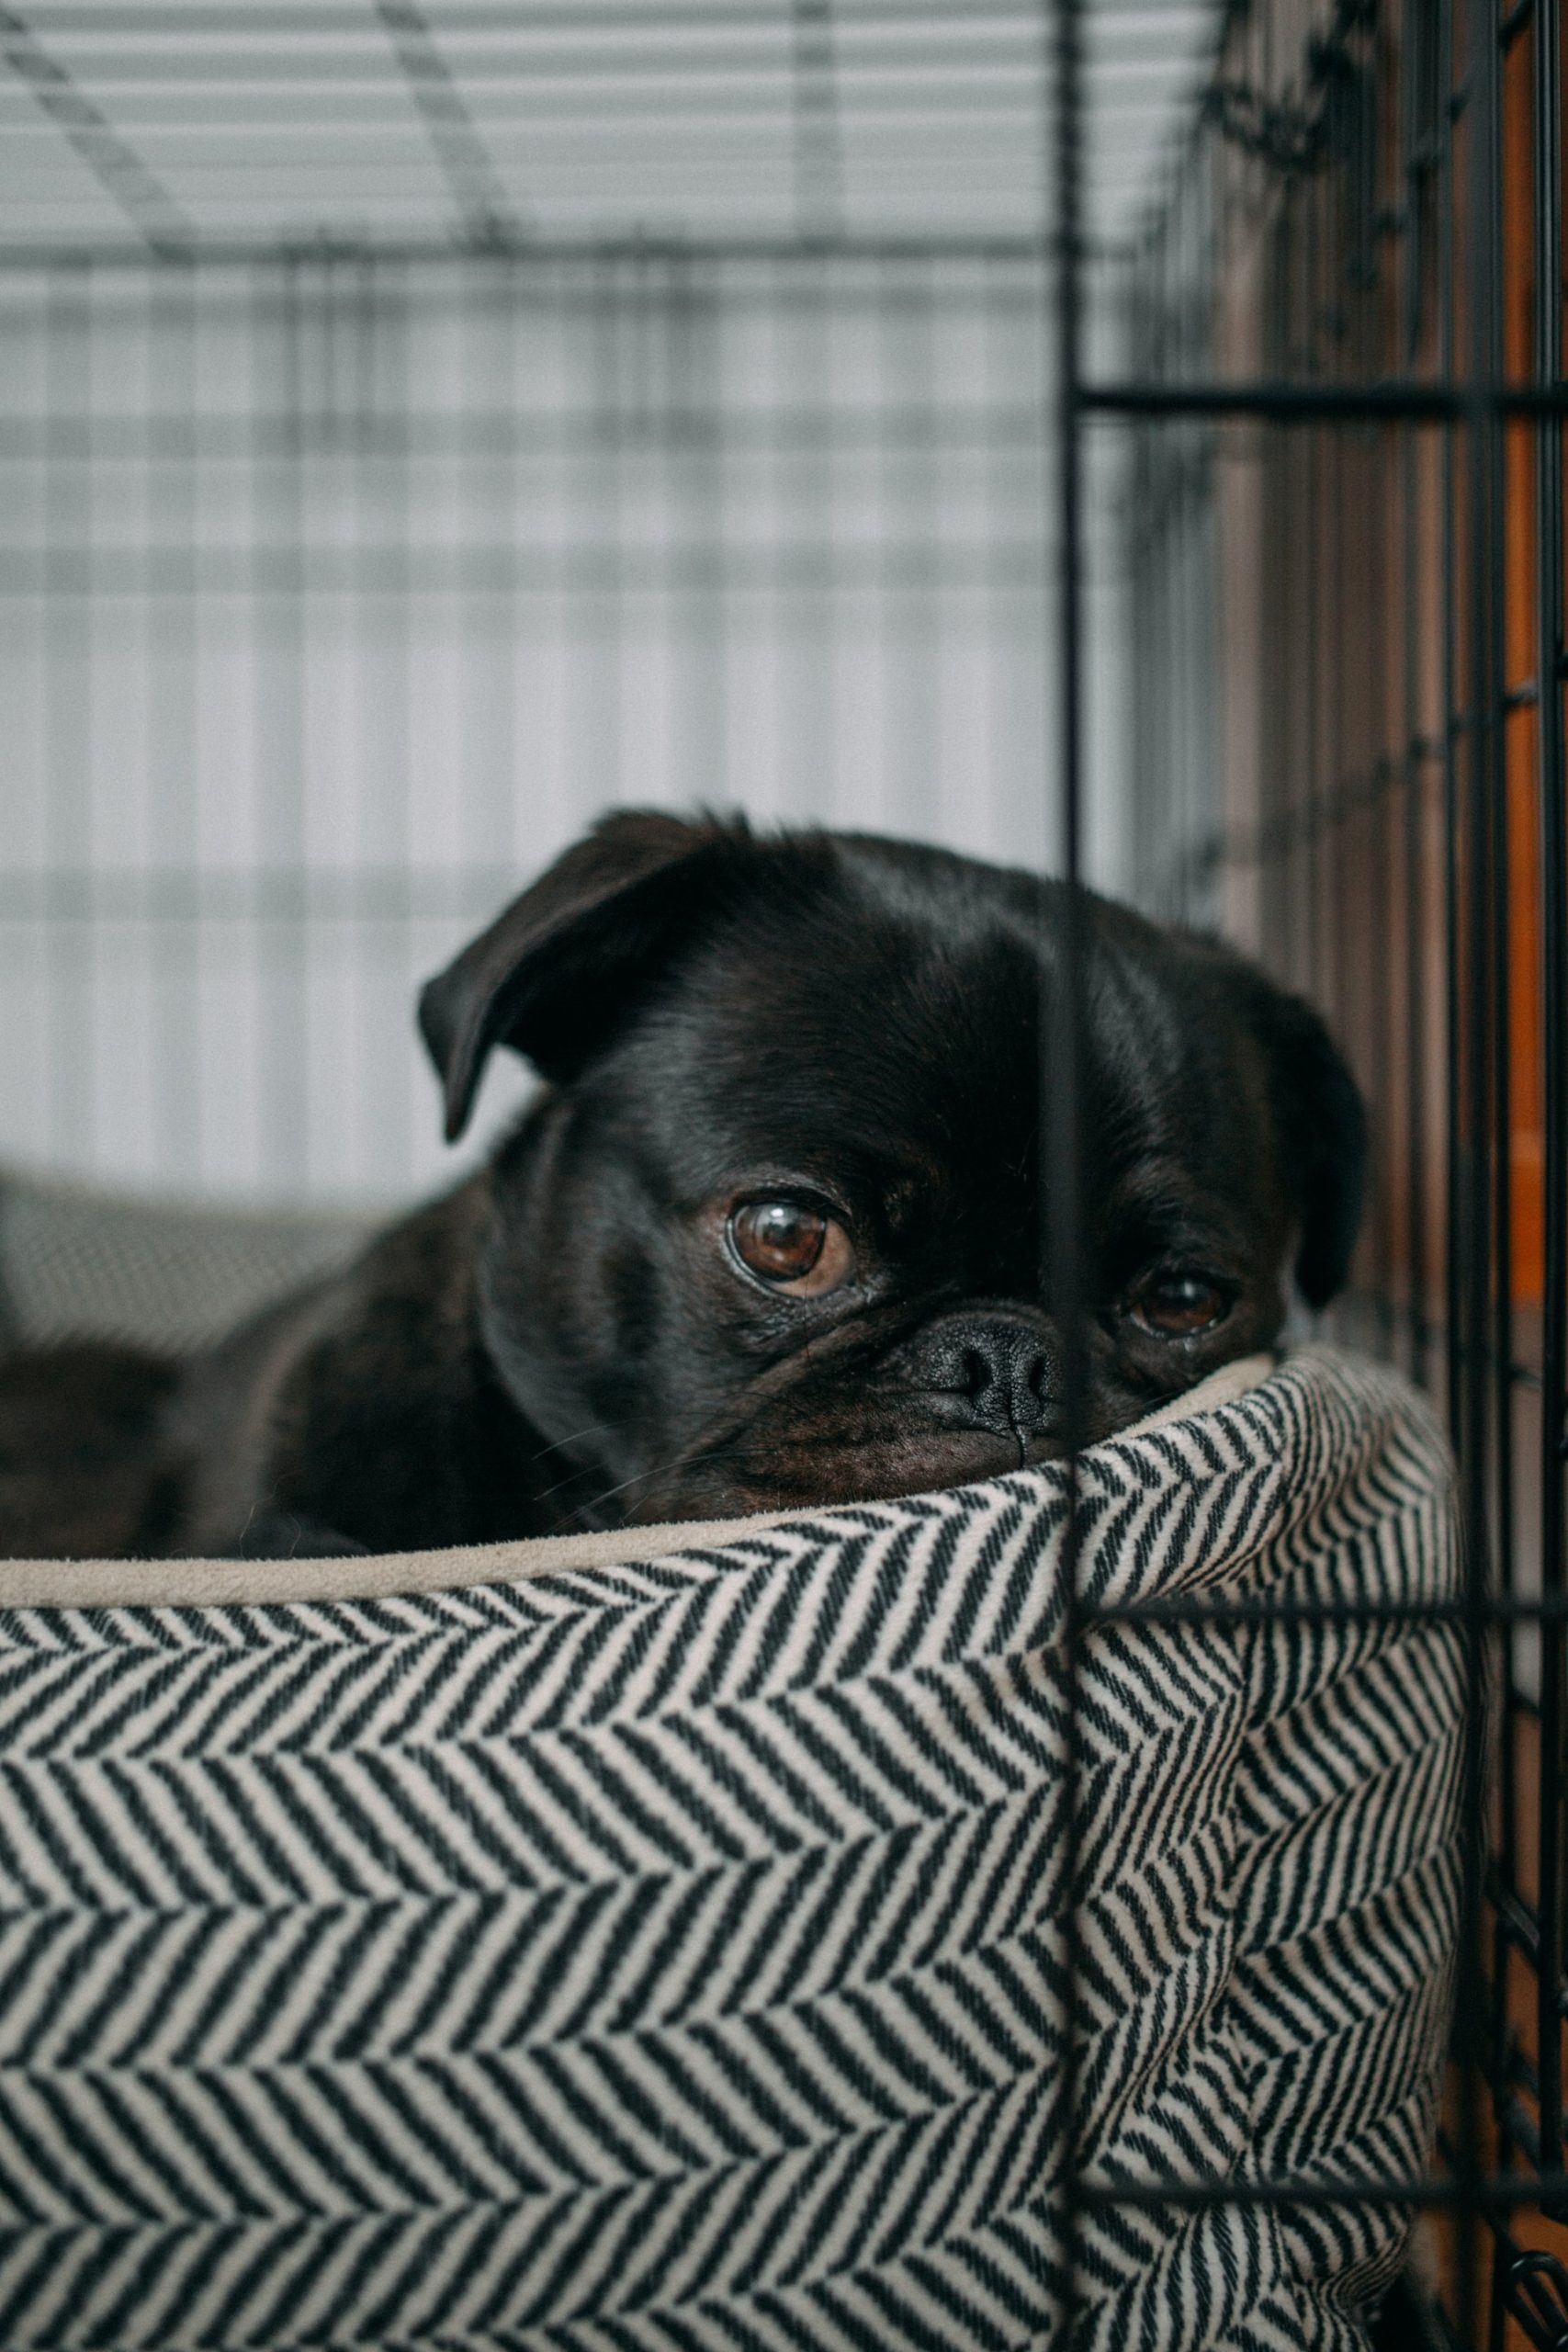 Comfy pup inside their crate. Image by Charles Deluvio from Unsplash.